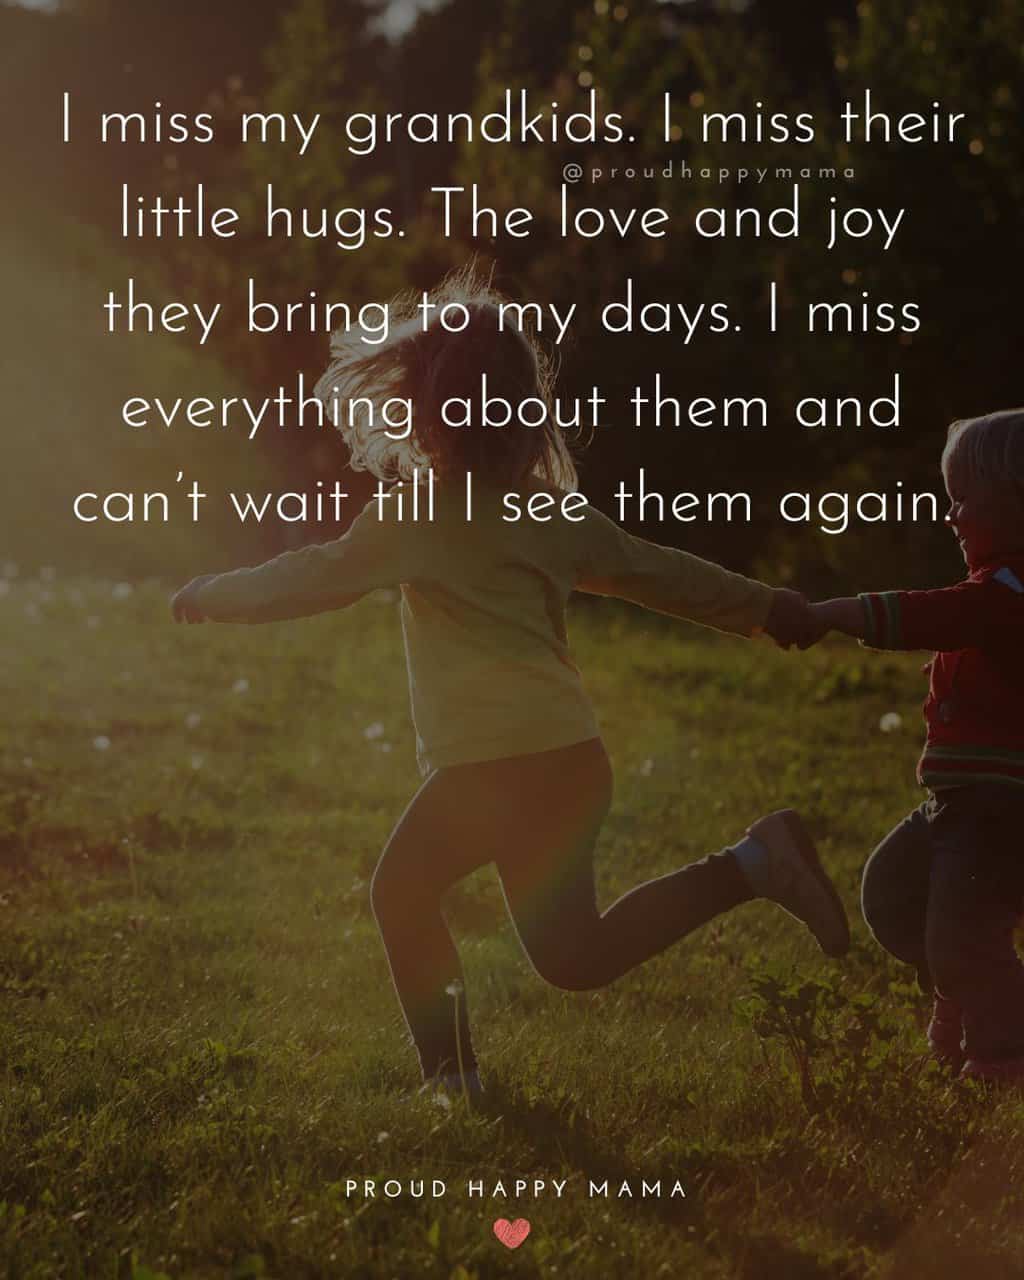 I miss my grandkids. I miss their little hugs. The love and joy they bring to my days. I miss everything about them and can’t wait till I see them again.